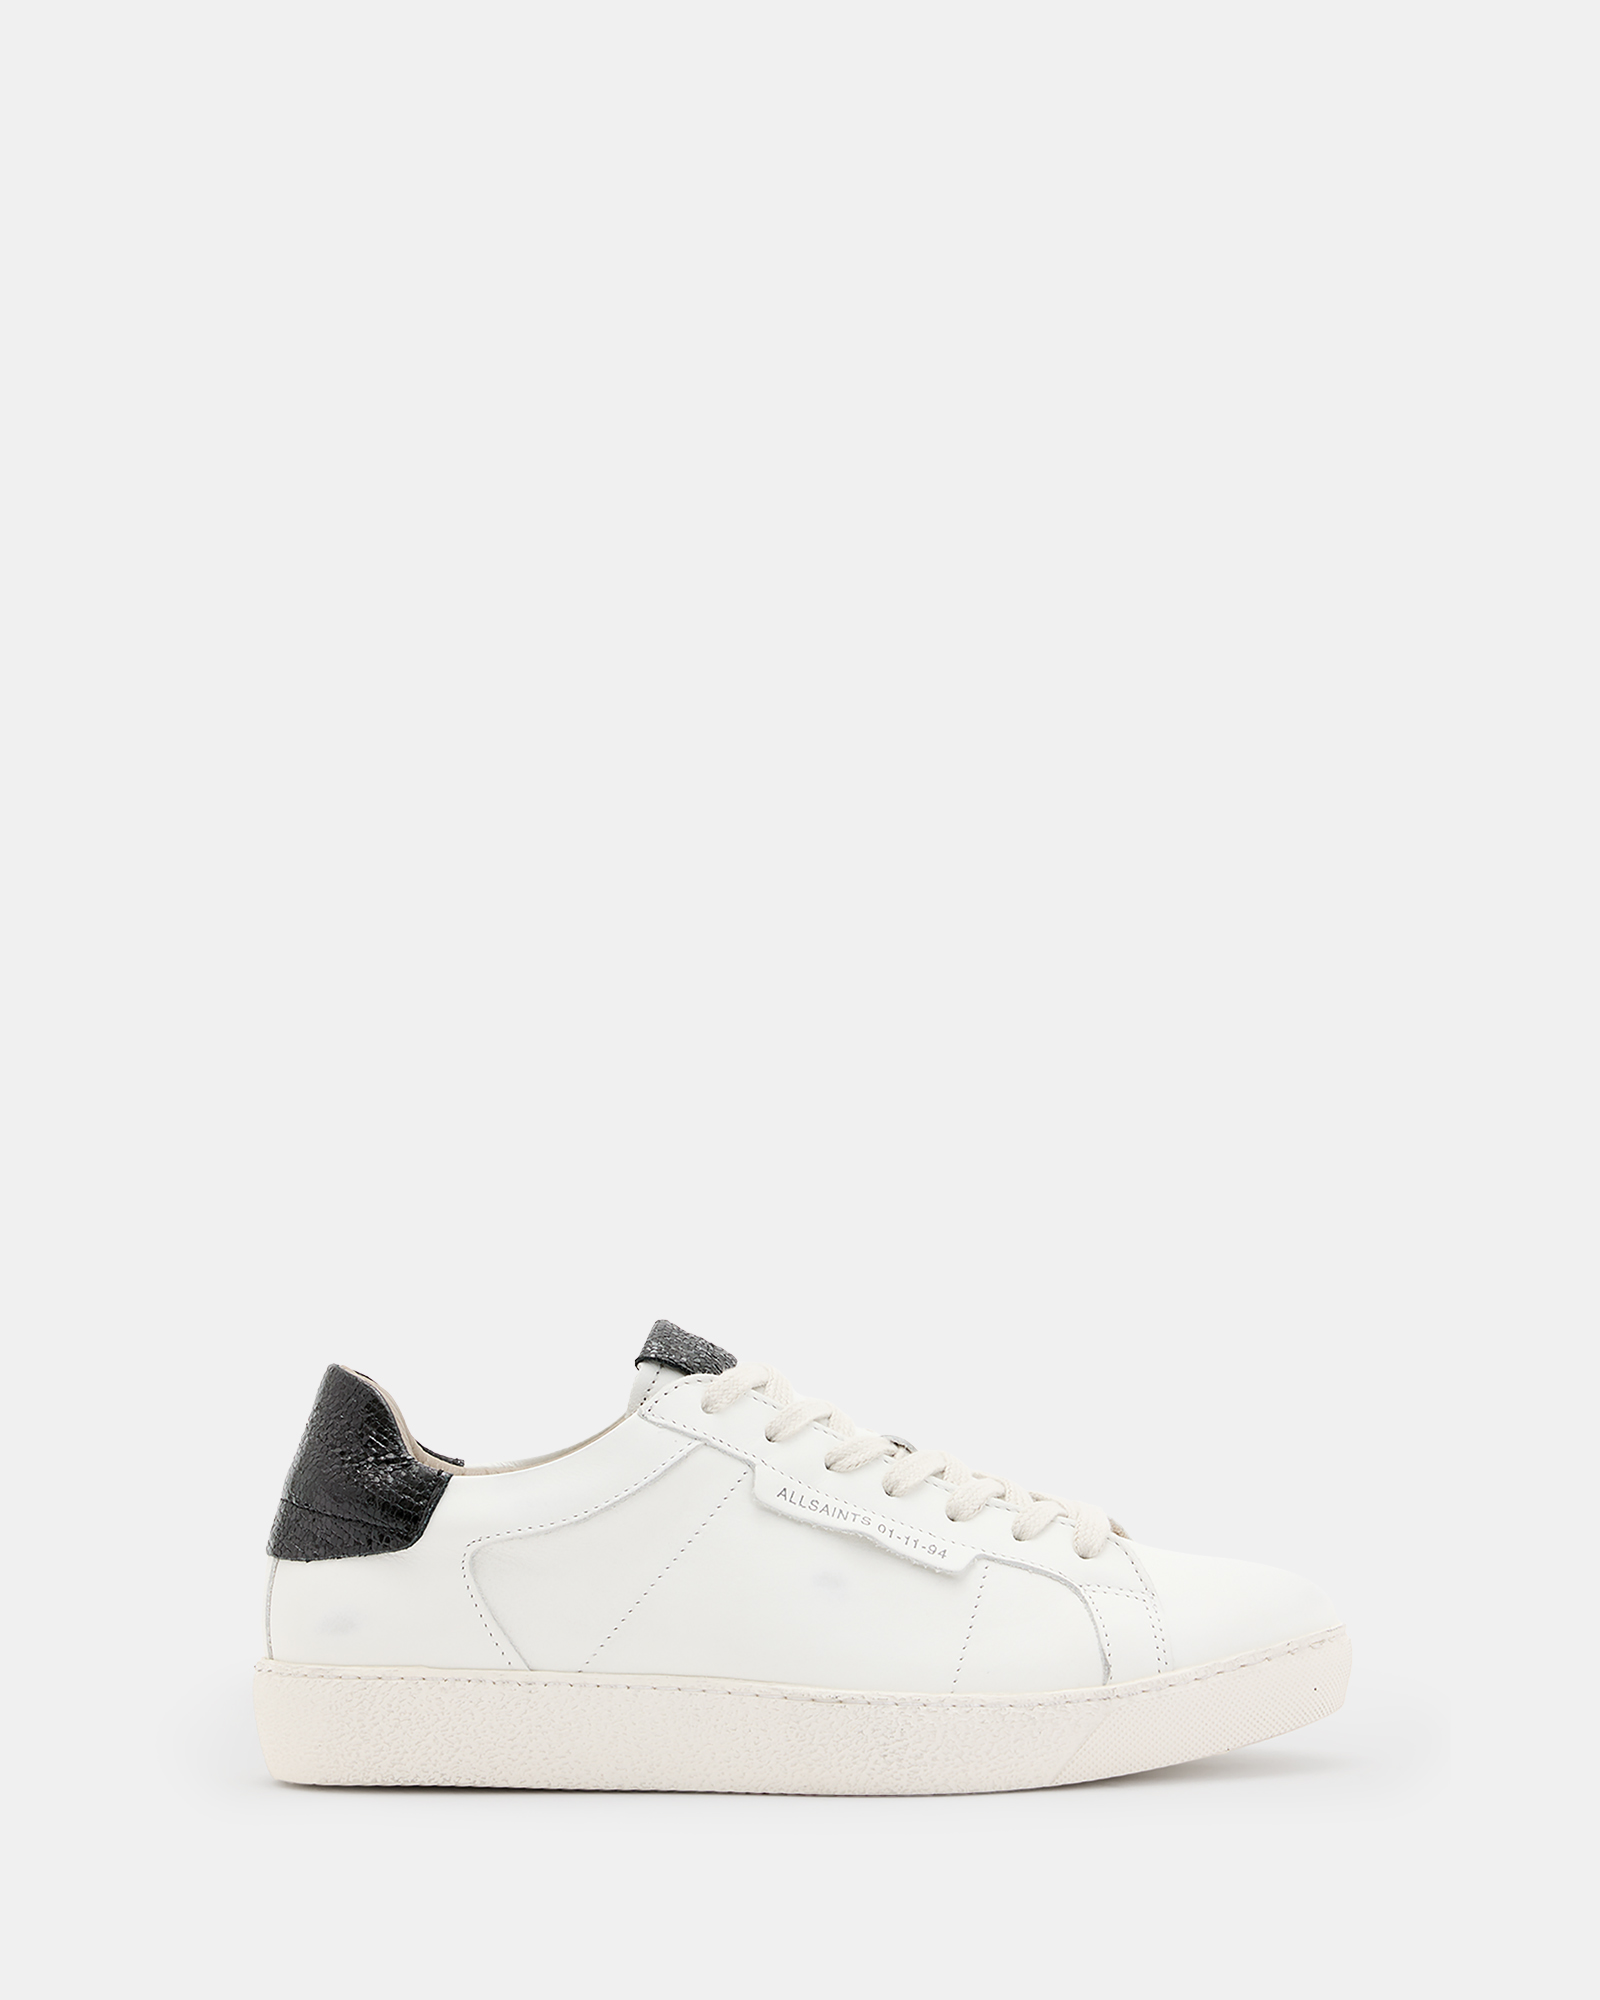 AllSaints Sheer Round Toe Leather Trainers,, WHITE/METALLIC, Size: UK